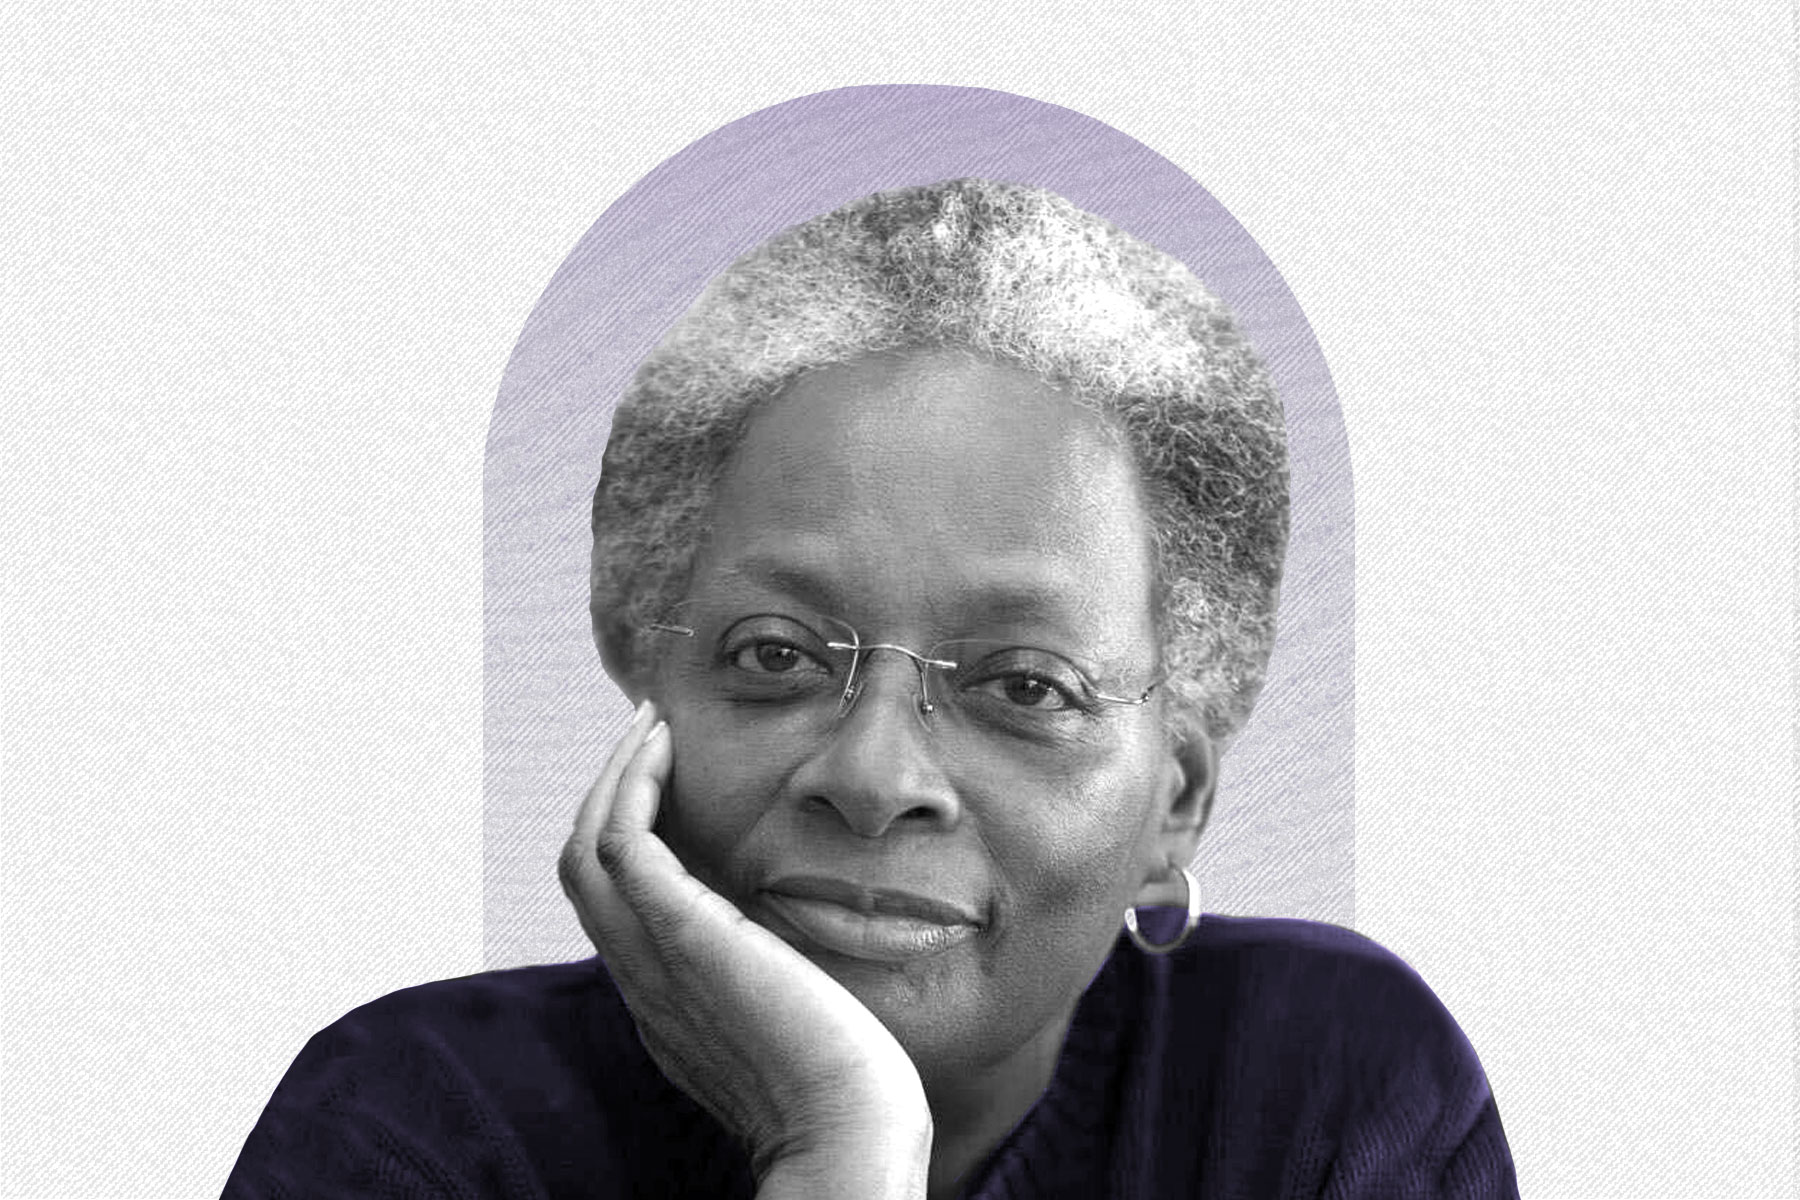 A photo illustrated portrait of Mandy Carter.